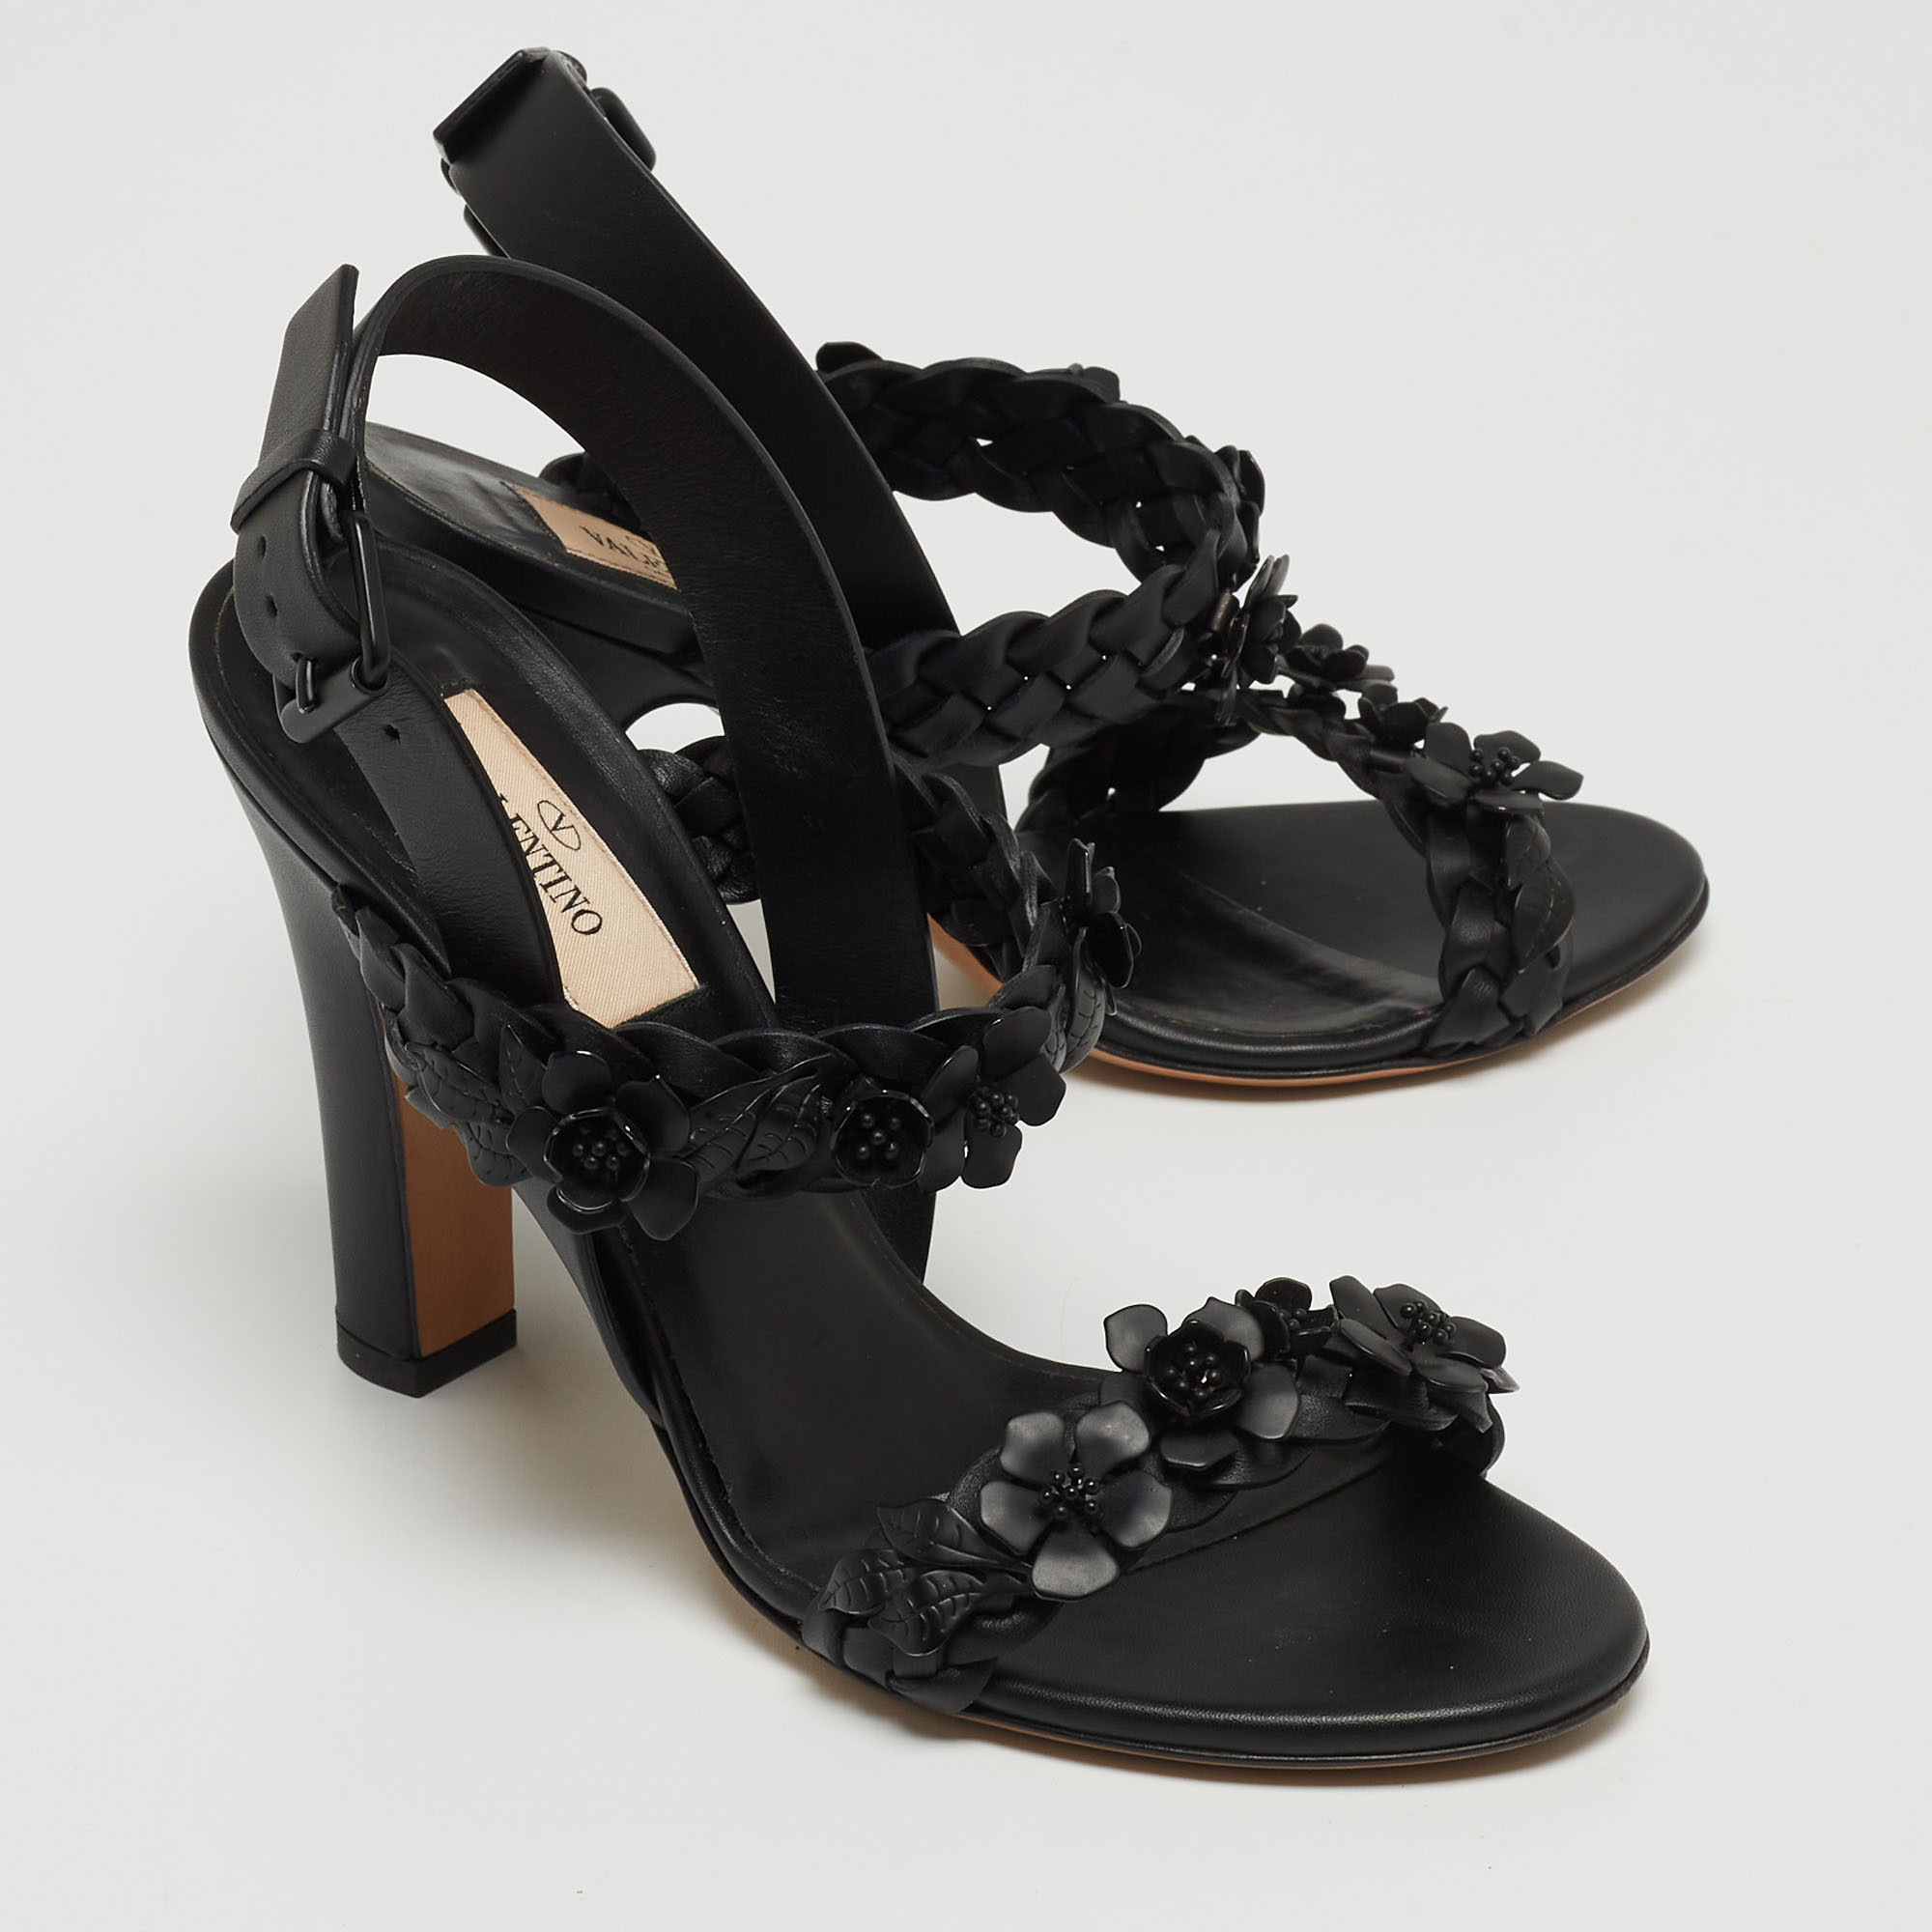 Valentino Black Leather Ankle Strap Sandals Size 35.5